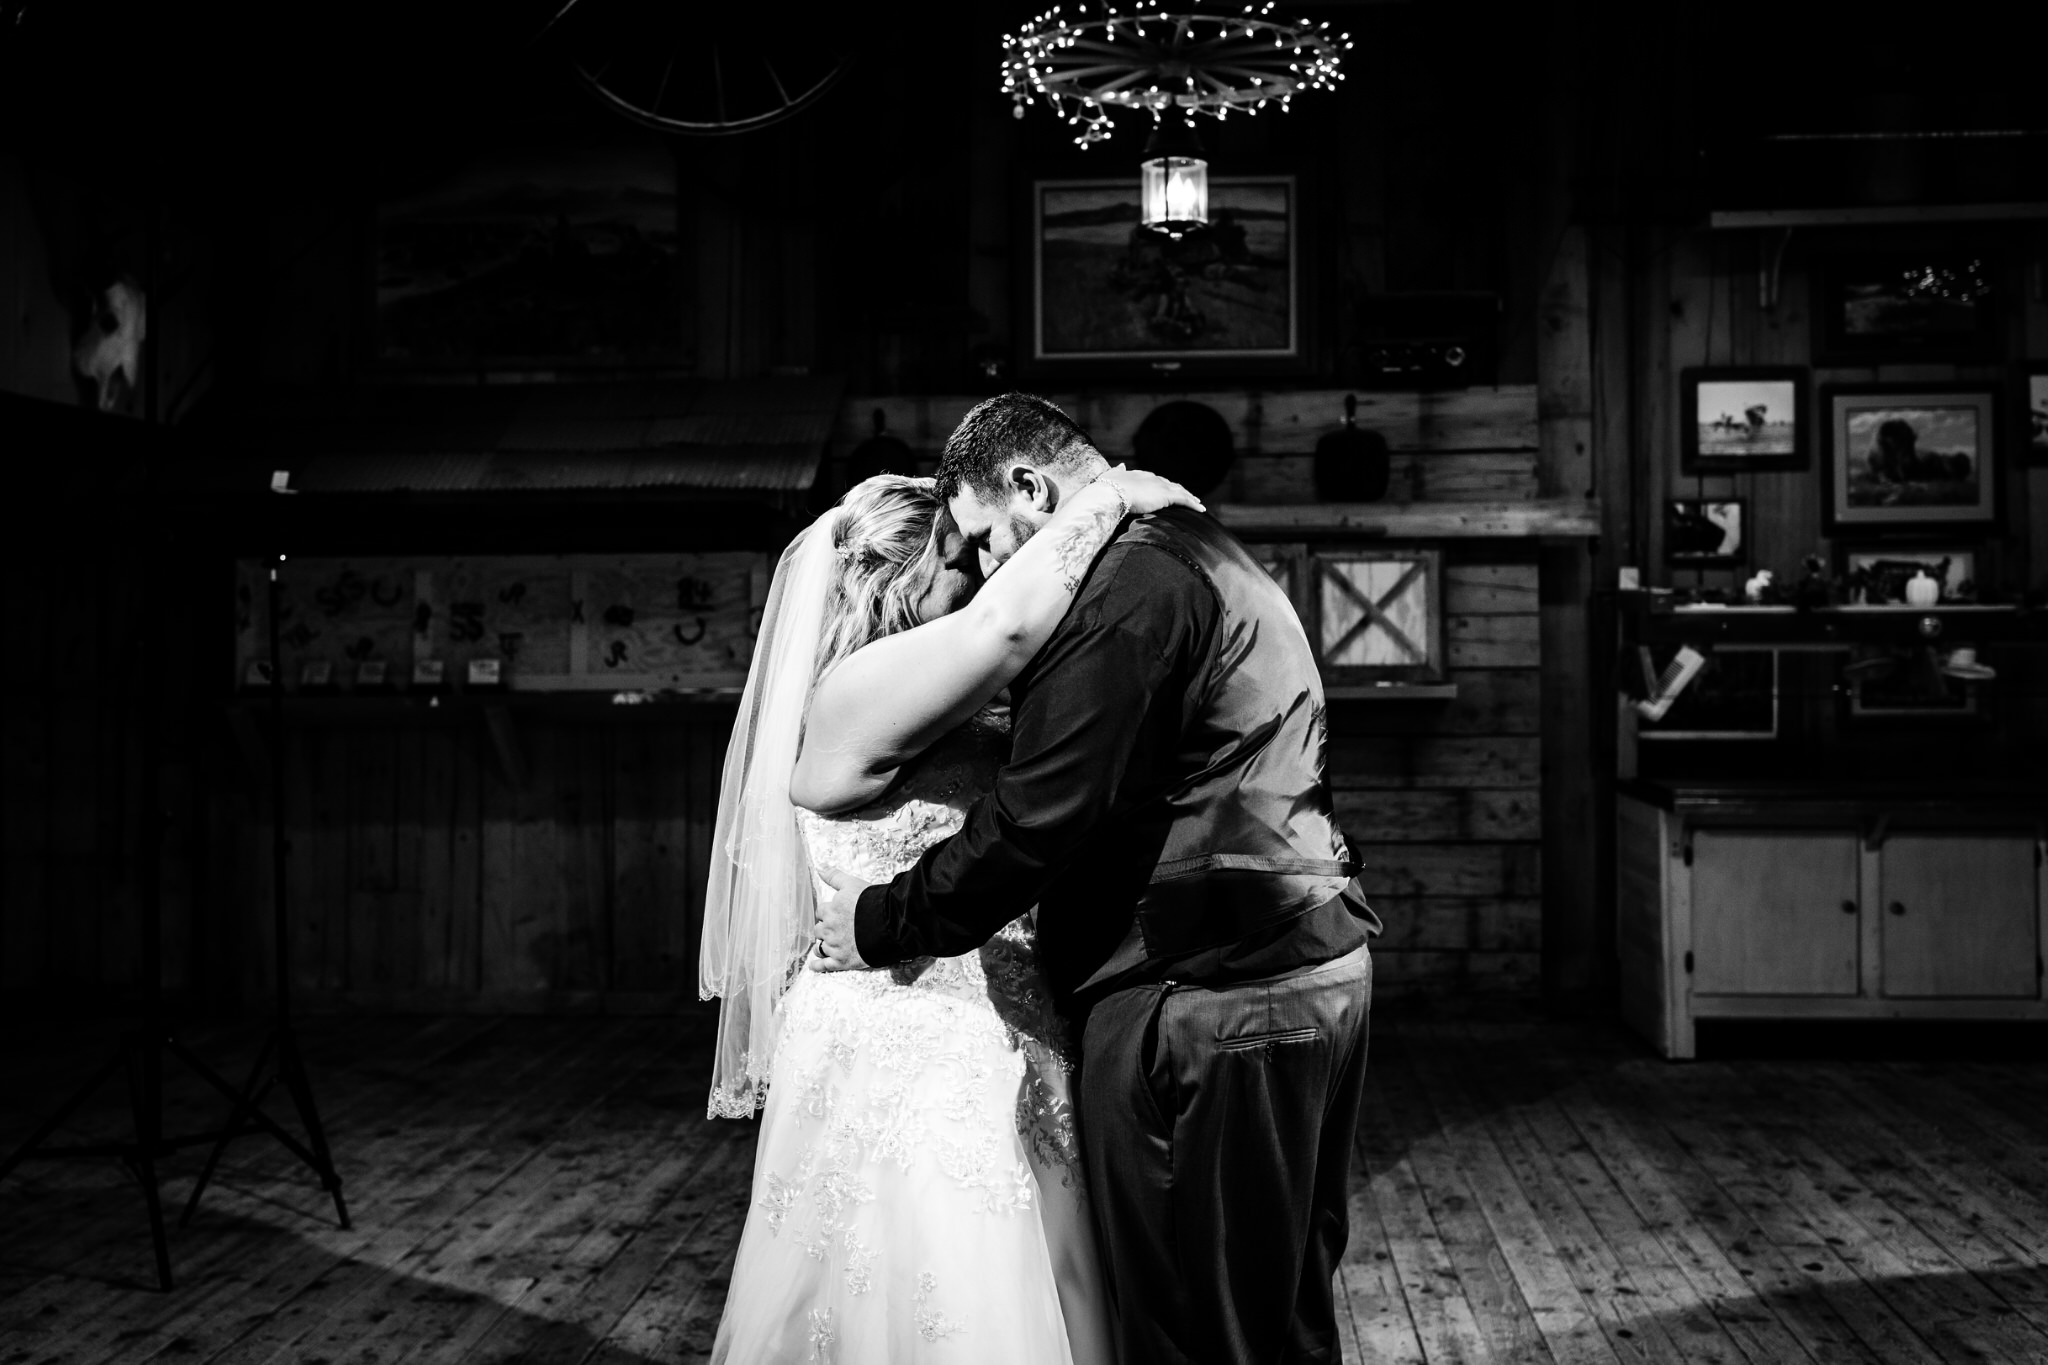 The bride and groom's first dance together. Briana and Kevin's Terry Bison Ranch Wedding by Wyoming Wedding Photographer Jennifer Garza, Wyoming Wedding, Wyoming Wedding Photographer, Wyoming Engagement Photographer, Wyoming Bride, Couples Goals, Wyoming Wedding, Wedding Photographer, Wyoming Photographer, Wyoming Wedding Photography, Wedding Inspiration, Destination Wedding Photographer, Fall Wedding, Ranch Wedding, Rustic Wedding Inspiration, Wedding Dress Inspo